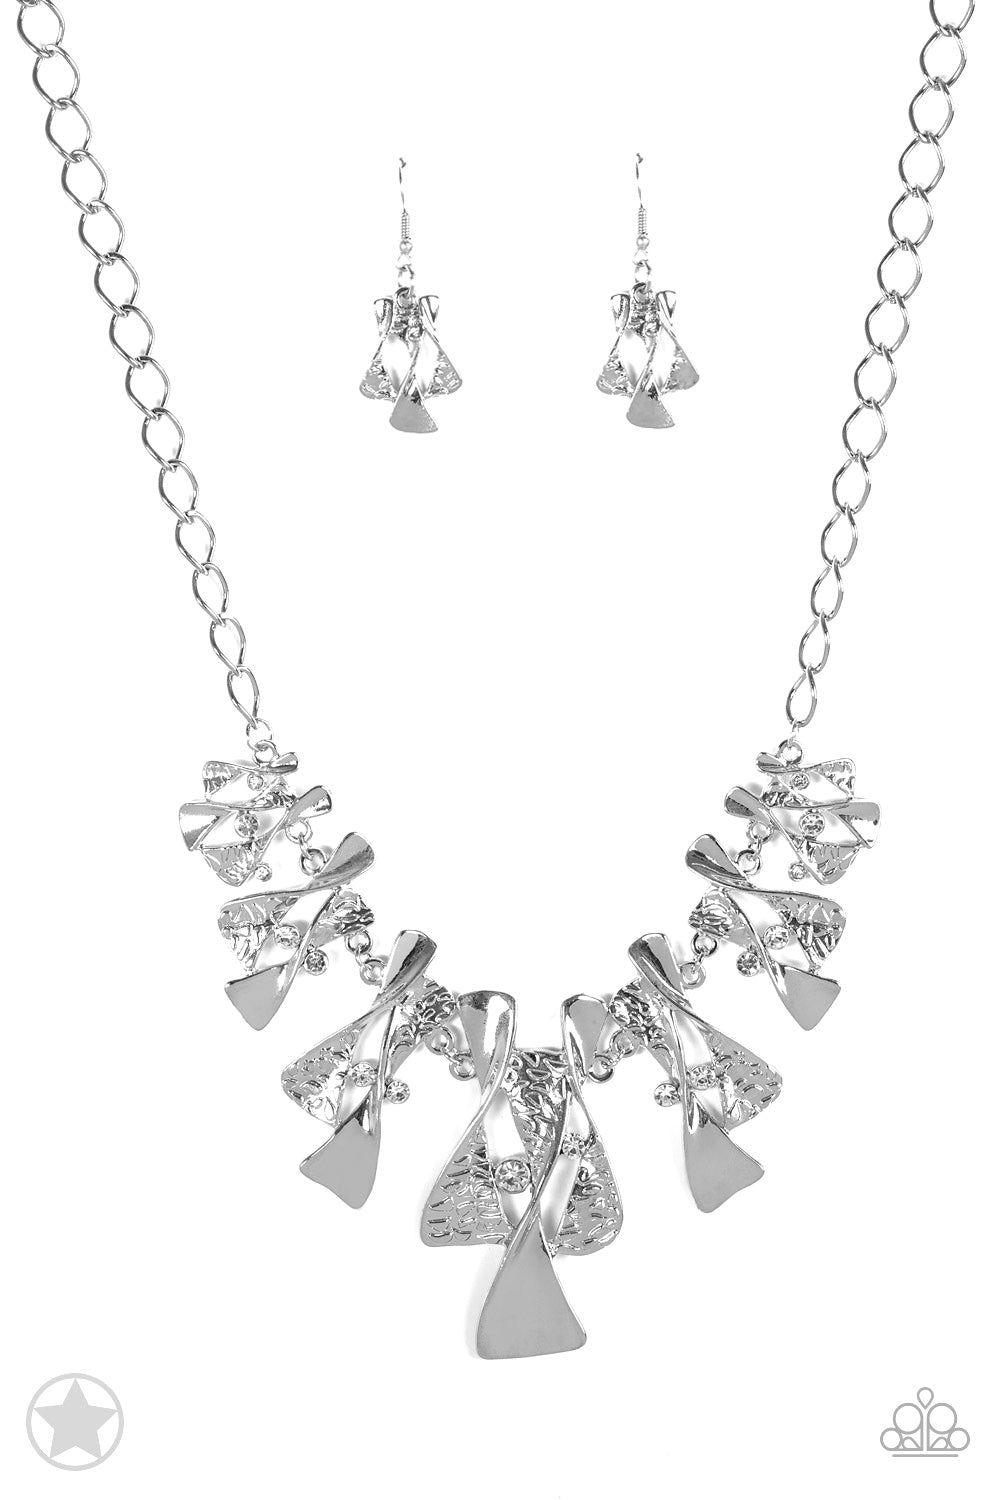 The Sands of Time - Silver Necklace Set